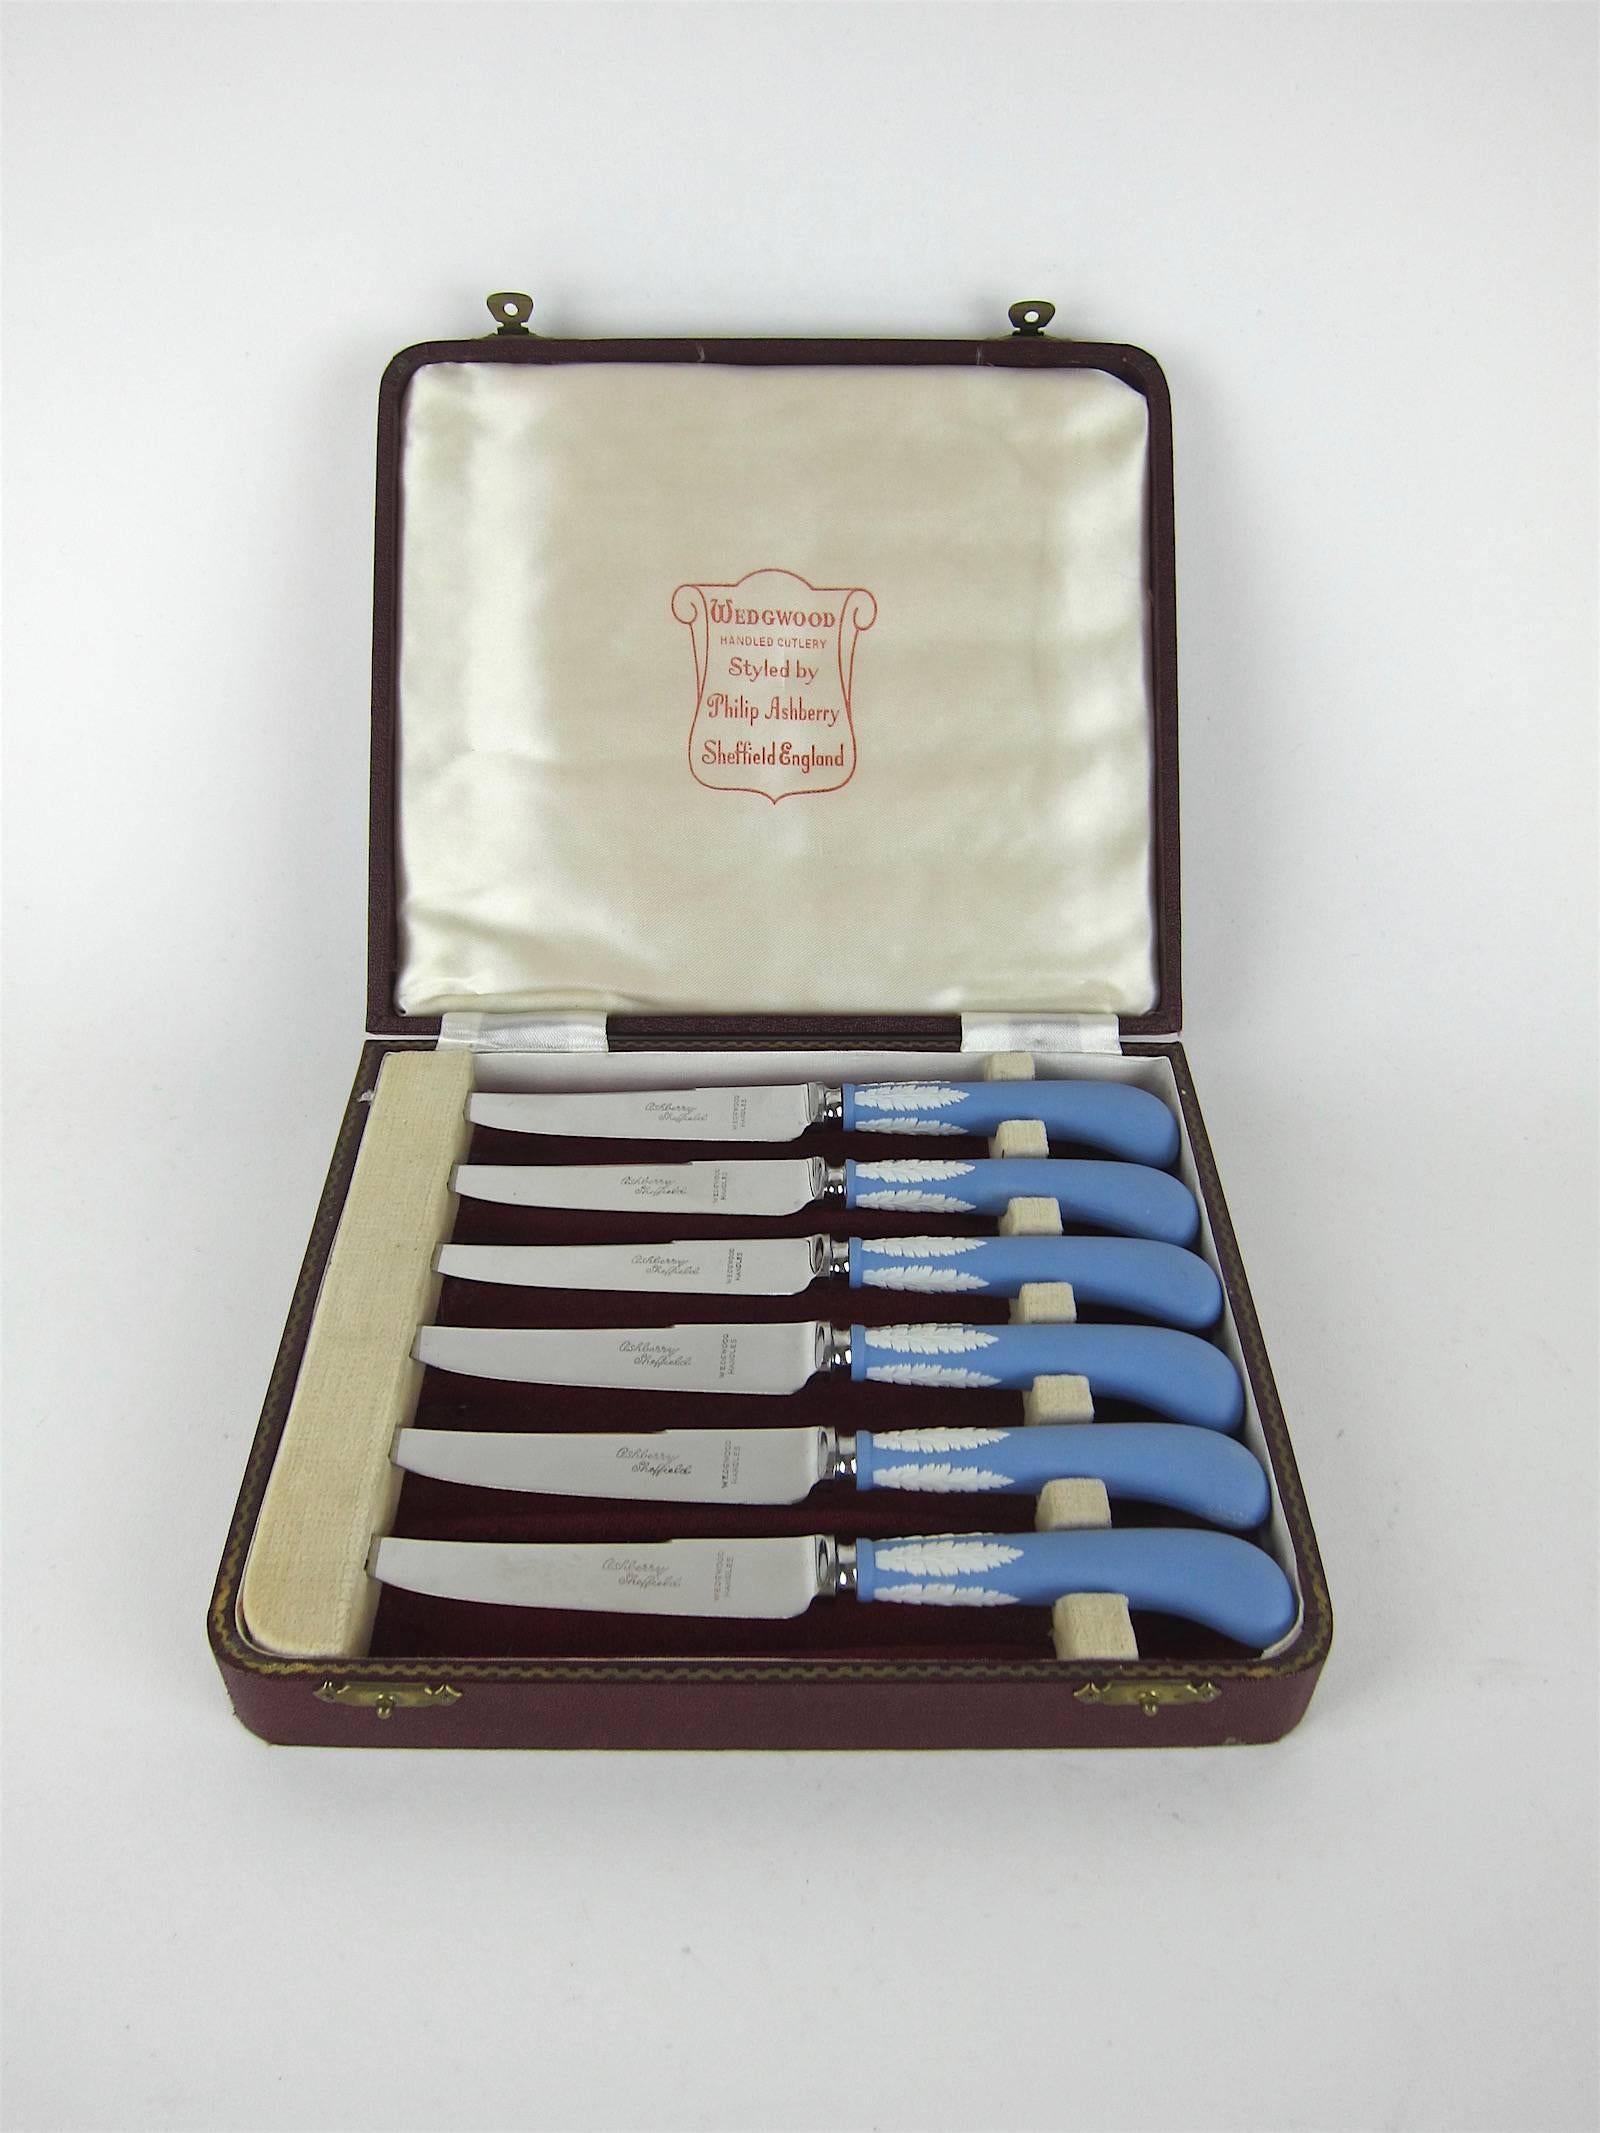 A handsome set of six vintage knives in their original fitted box styled by metalware manufacturer Philip Ashberry & Sons of Sheffield, England, circa 1950s. The pistol-shaped handles are of solid pale blue jasper decorated with neoclassical